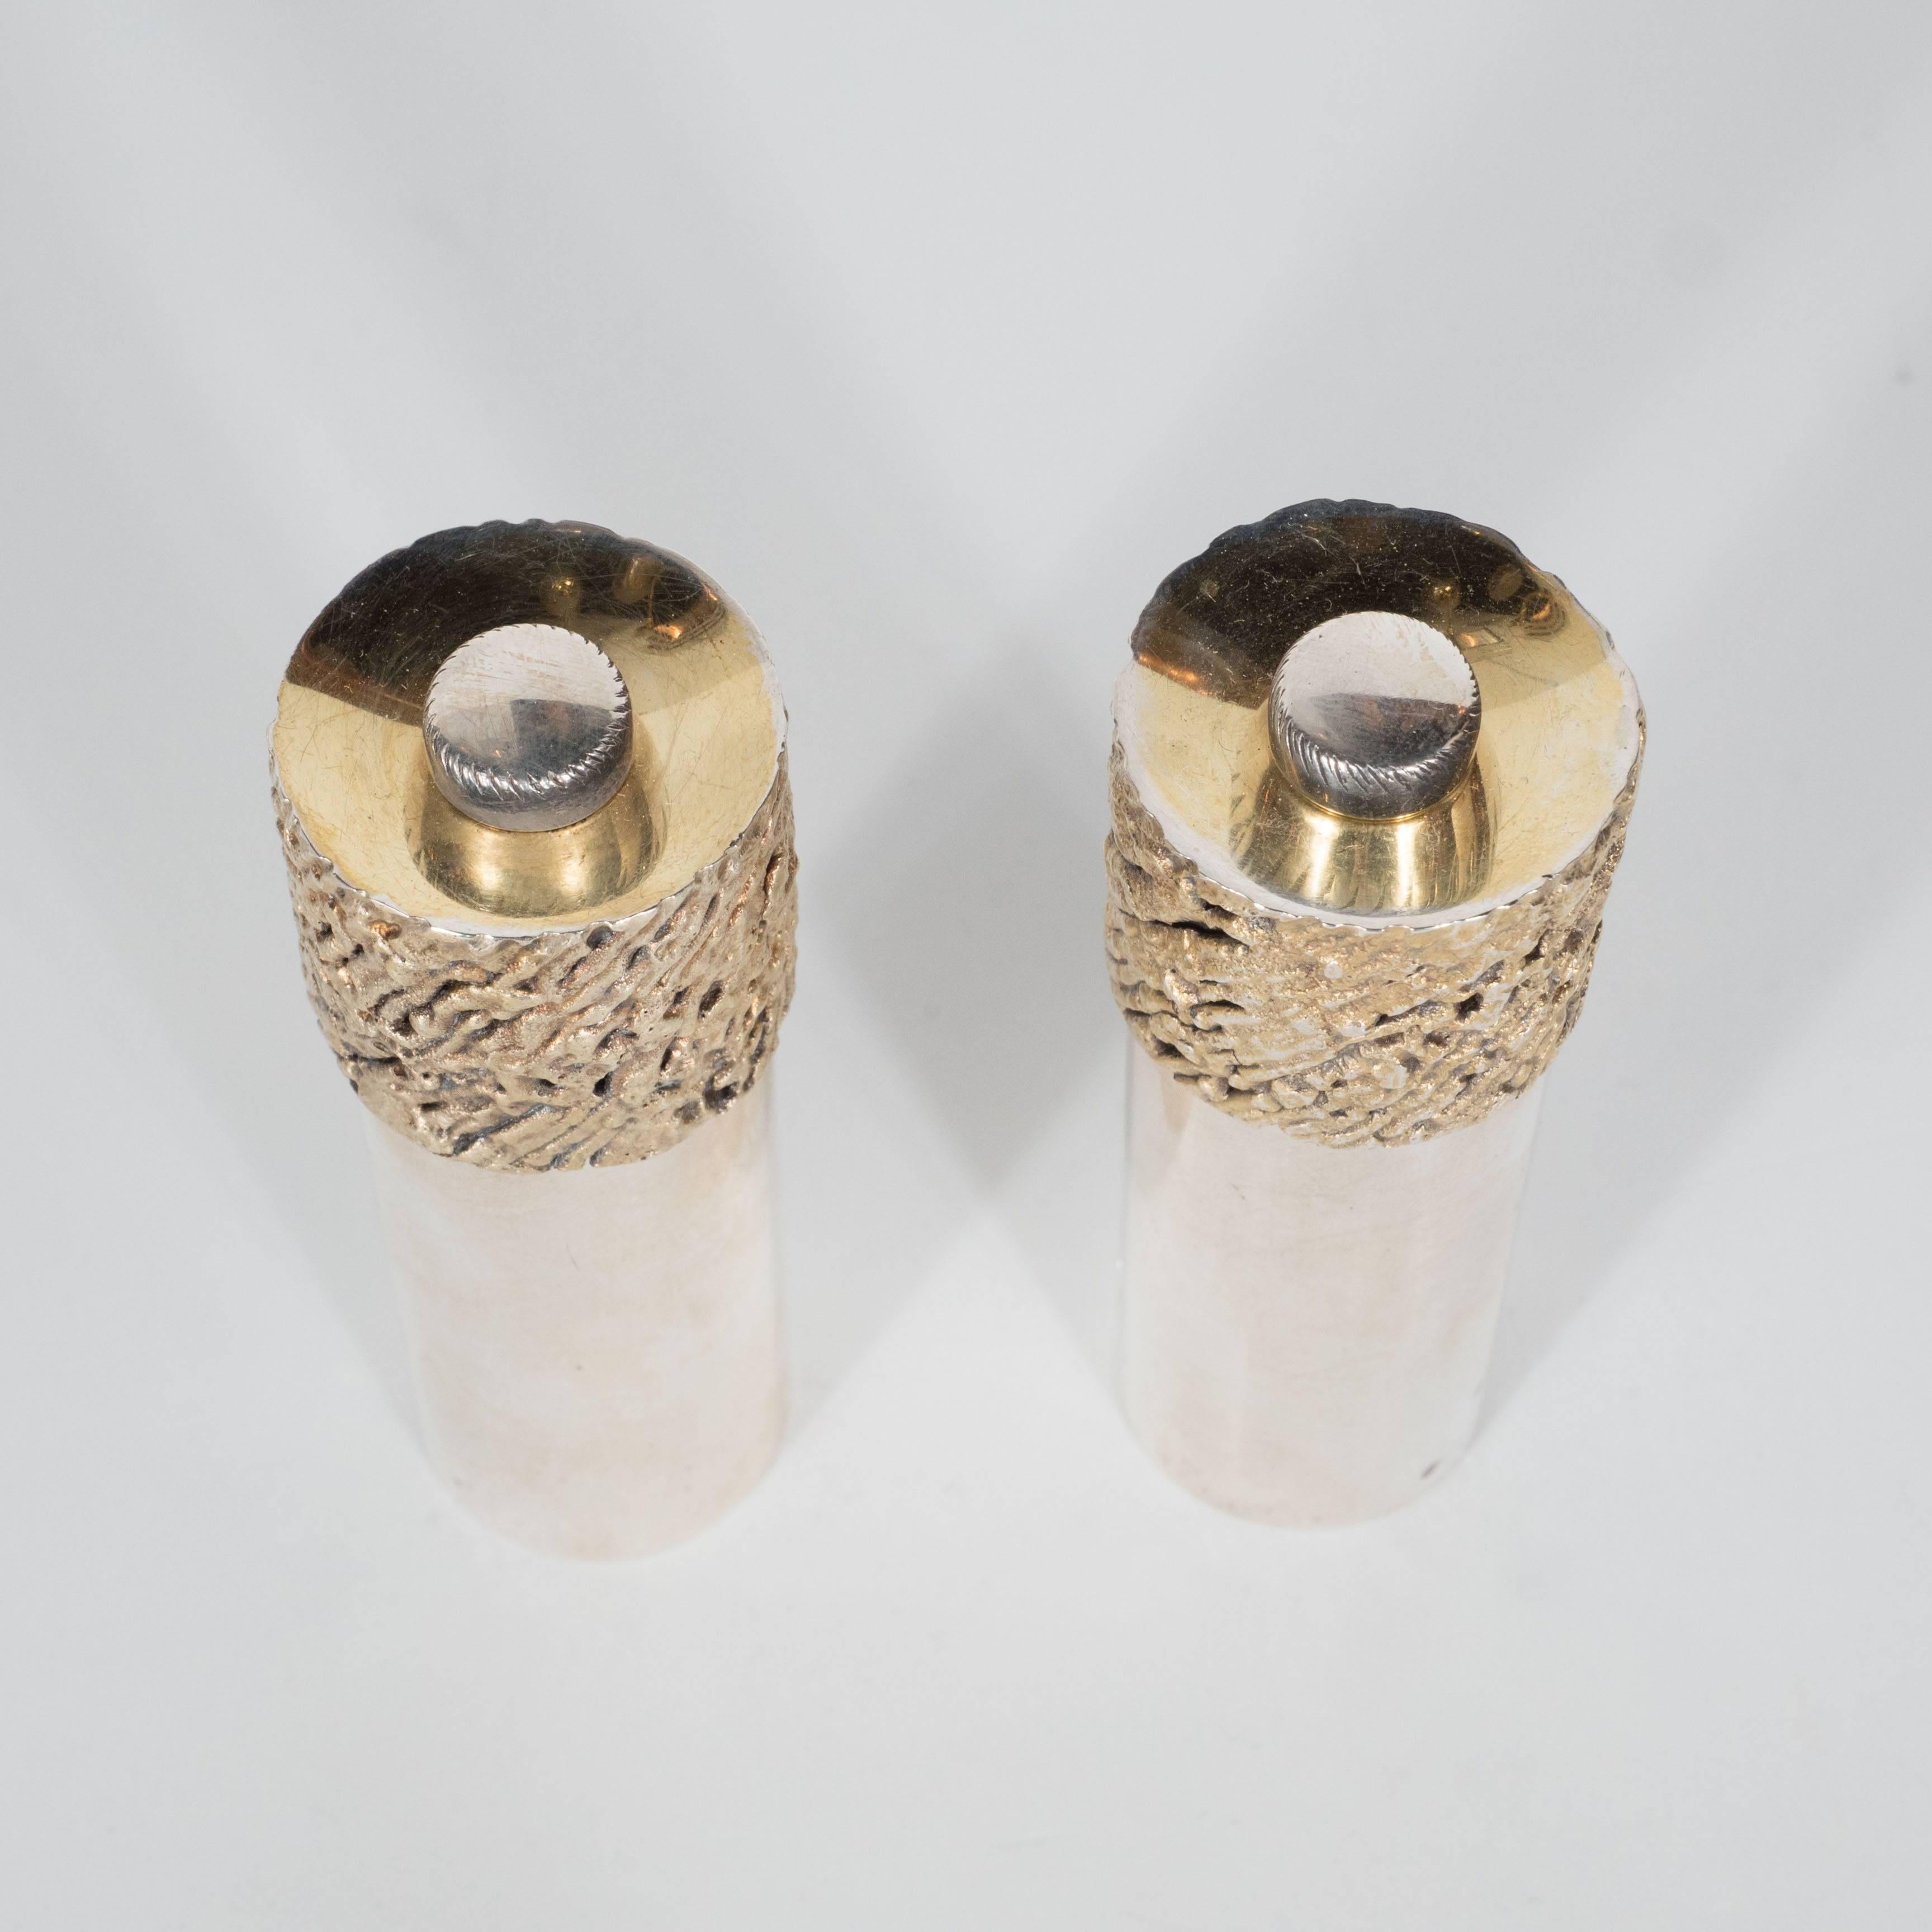 These very beautiful salt and pepper grinders are sterling silver and cylindrical in form with a Brutalist turning top in 18-karat gilt. They have English Hallmarks and marked SD as well. I have never seen anything quite like them and they are not